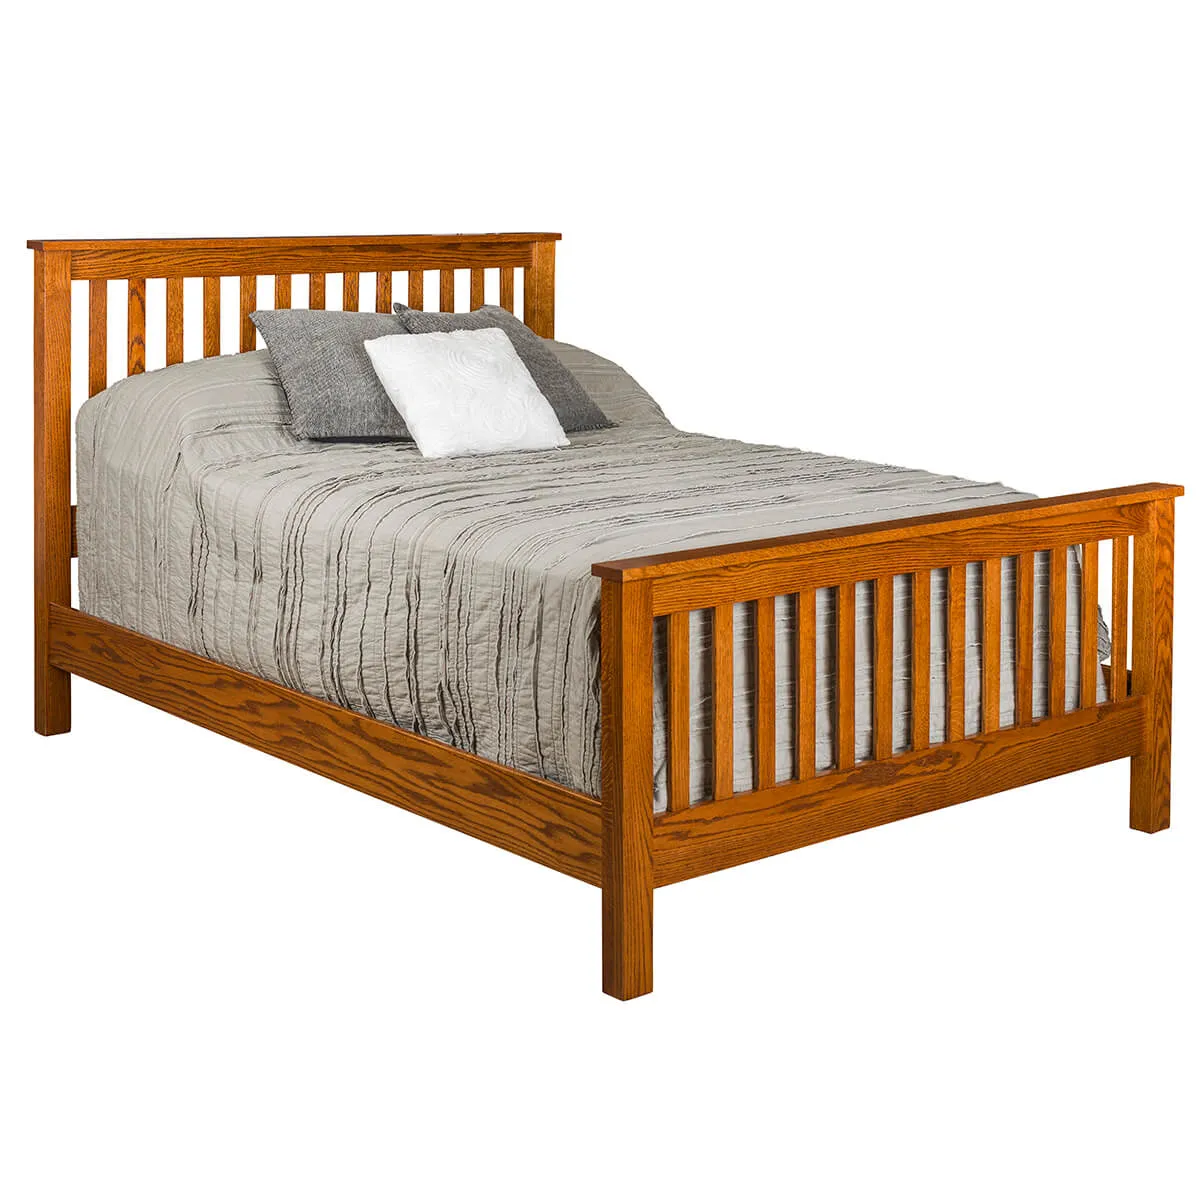 Pv Mission Queen Bed